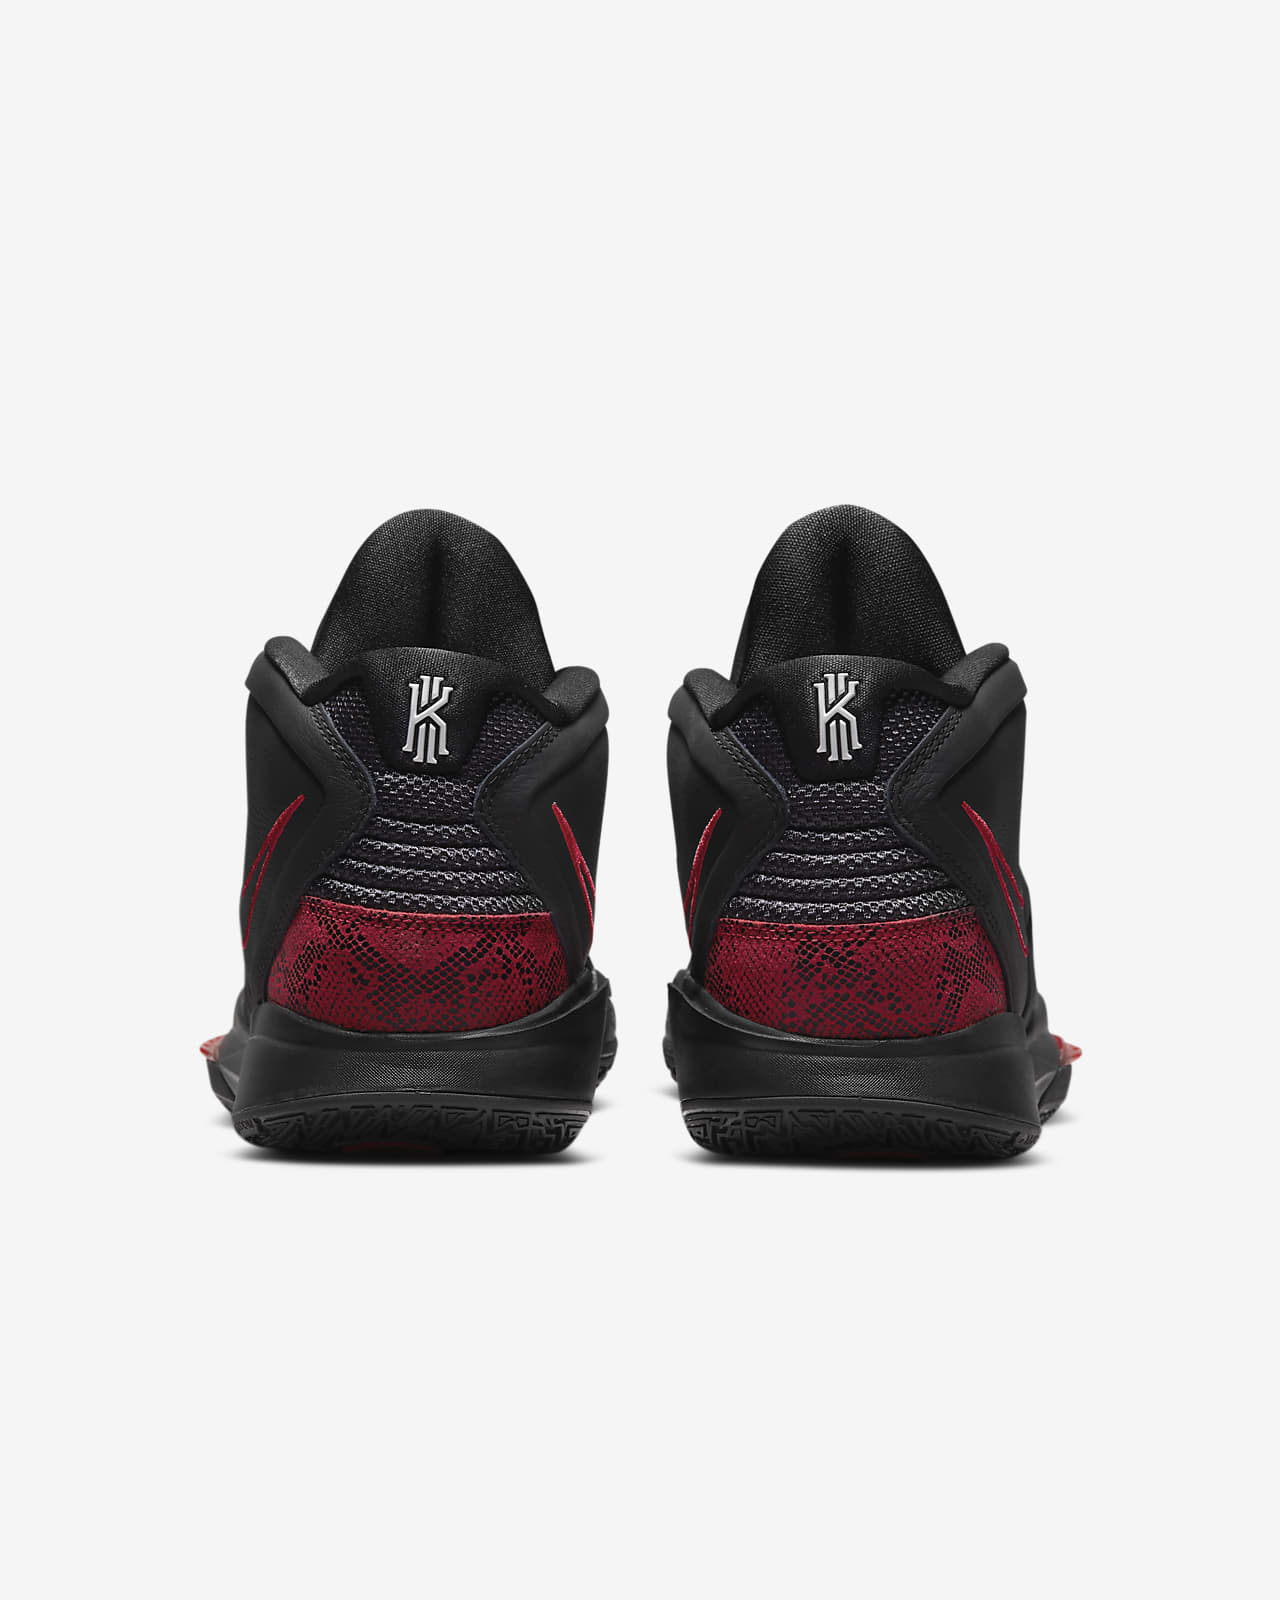 Kyrie Infinity Basketball Shoes